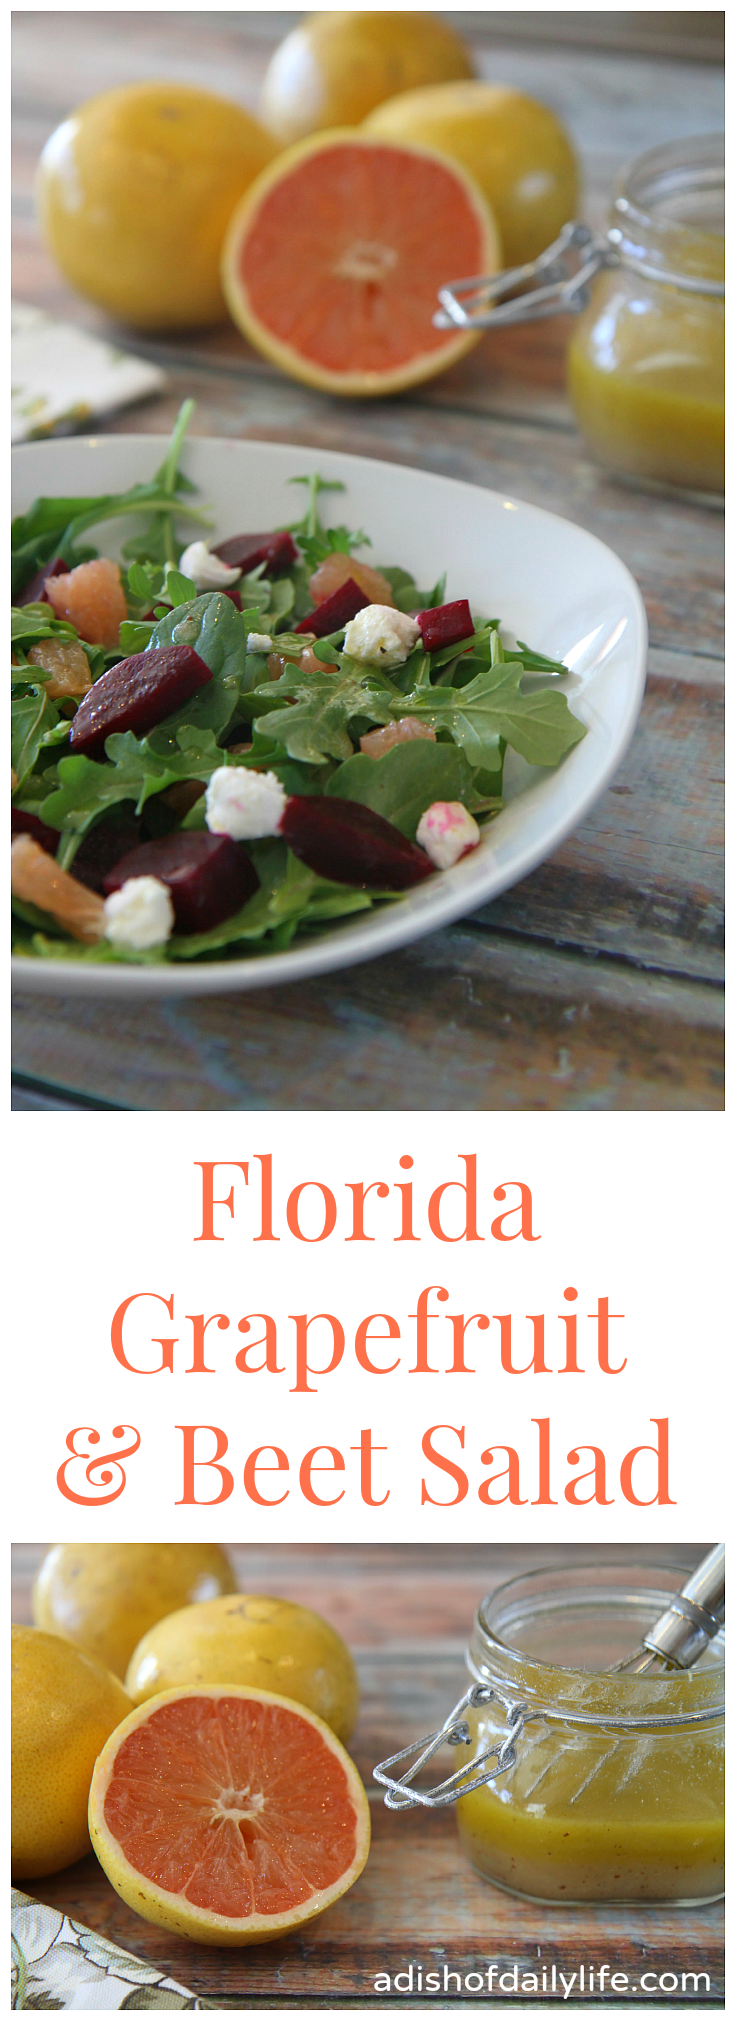 Pair Florida grapefruit and beets with arugula, goat cheese and a tart, sweet grapefruit vinaigrette for a winter salad guaranteed to tickle your tastebuds!